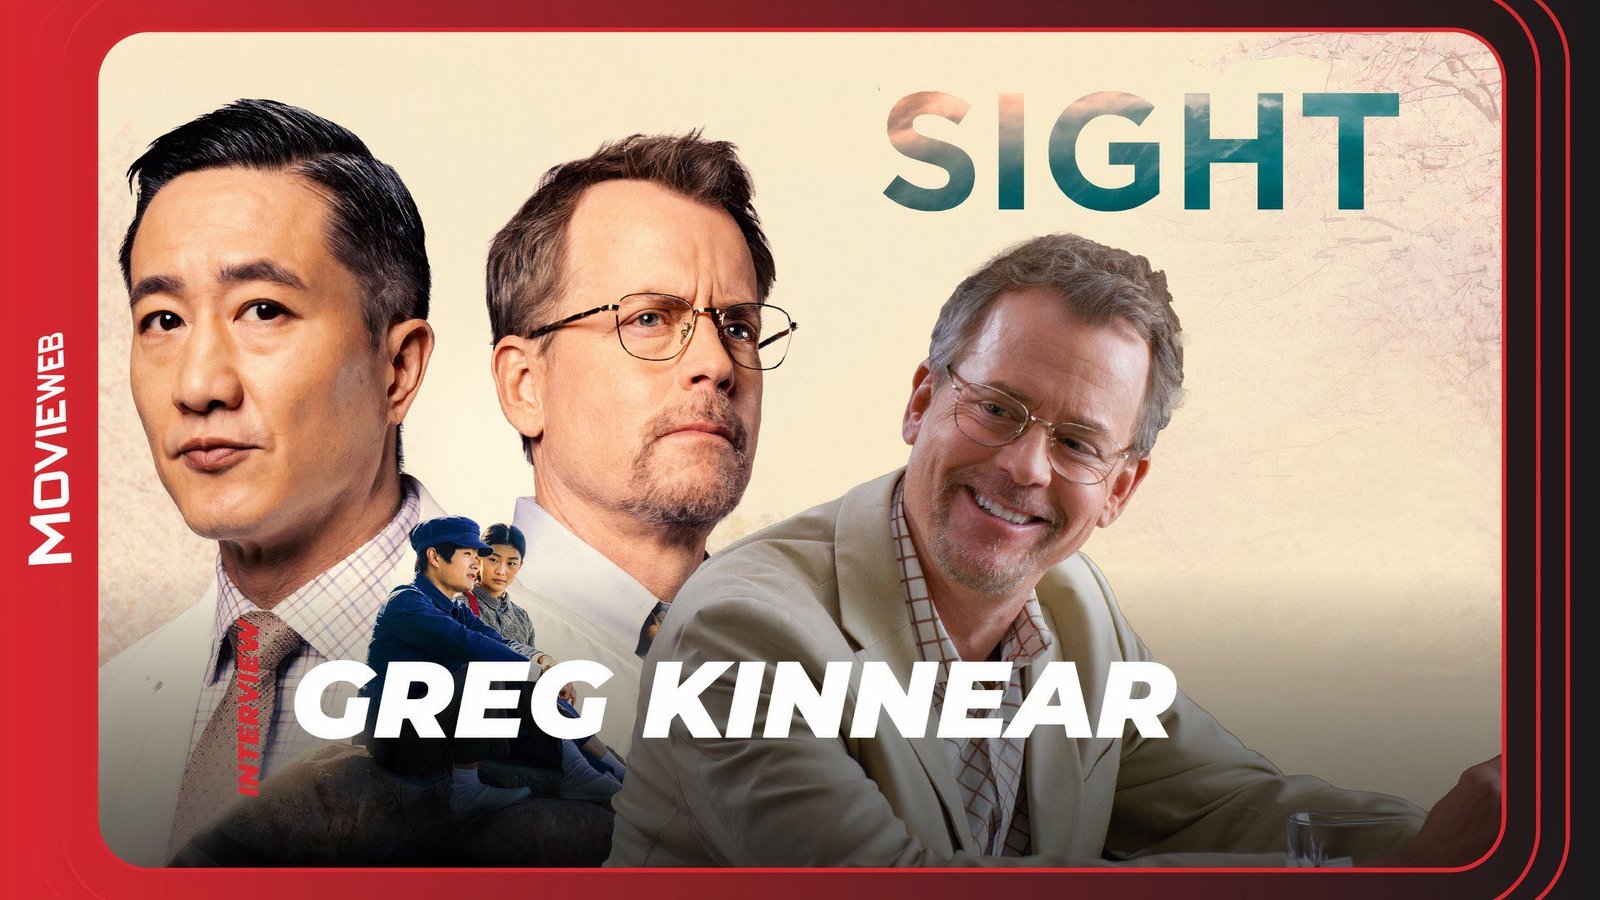 Greg Kinnear Discusses Sight and Its Incredible True Story